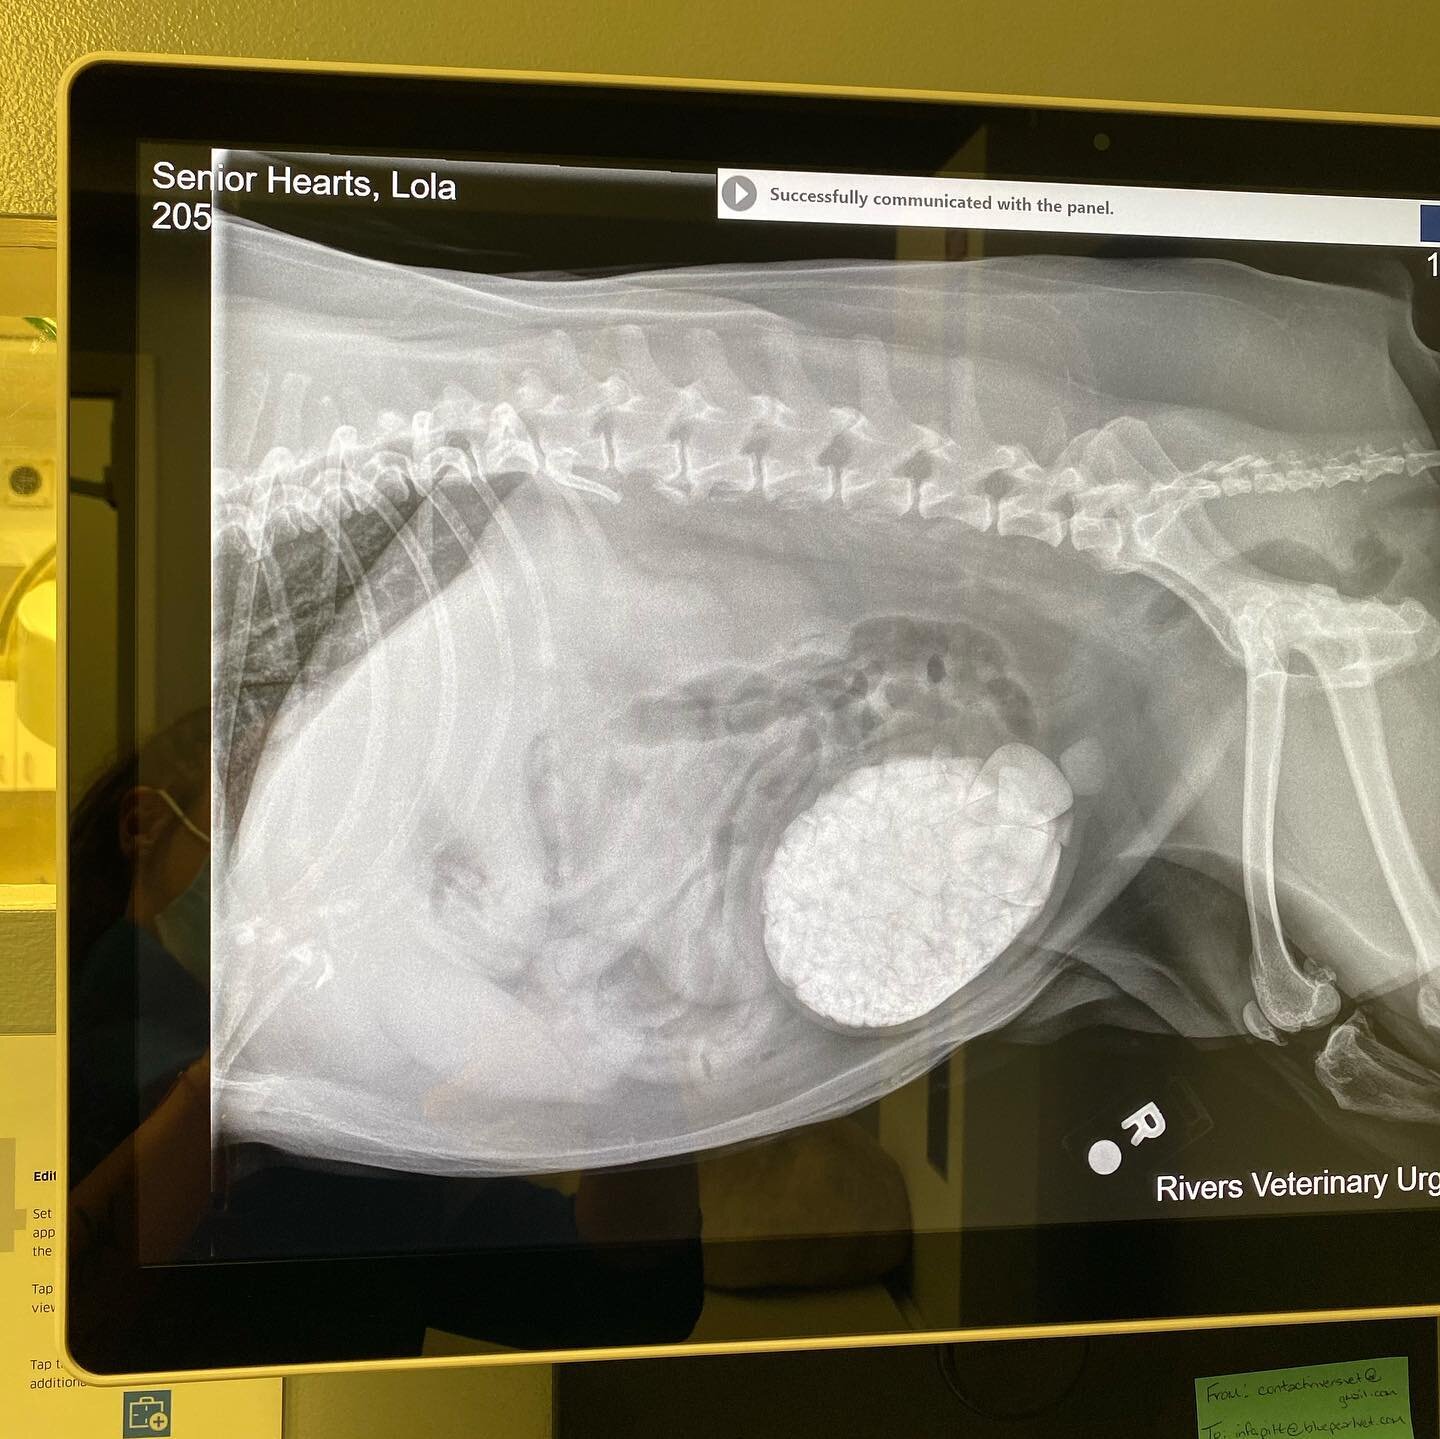 Meet Miss Lola, an elderly pug  who was rescued by @seniorheartsrescueandrenewal to live out her geriatric years. On her first check up, we found a bladder FULL of bladder stones!!! This little lady had surgery today to remove them, and we were shock